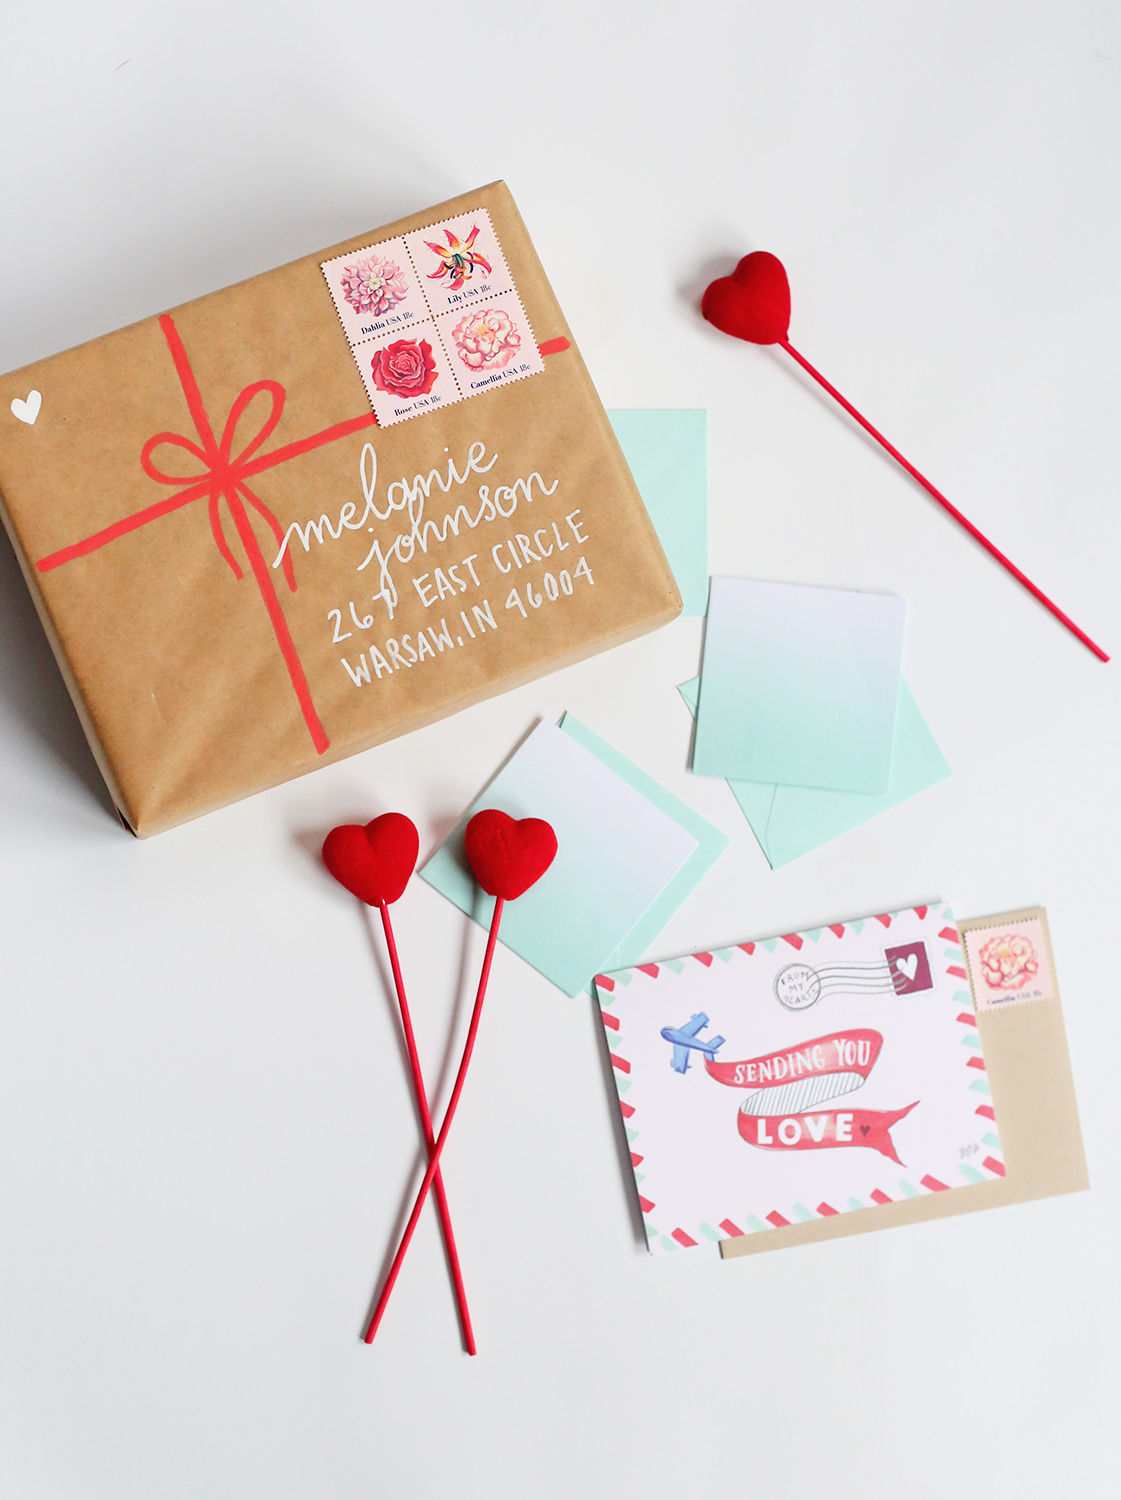 Send some love with our February Happy Mail idea! We're including all the things that make snail mail special! Enter to win this giveaway on Lily & Val Living!